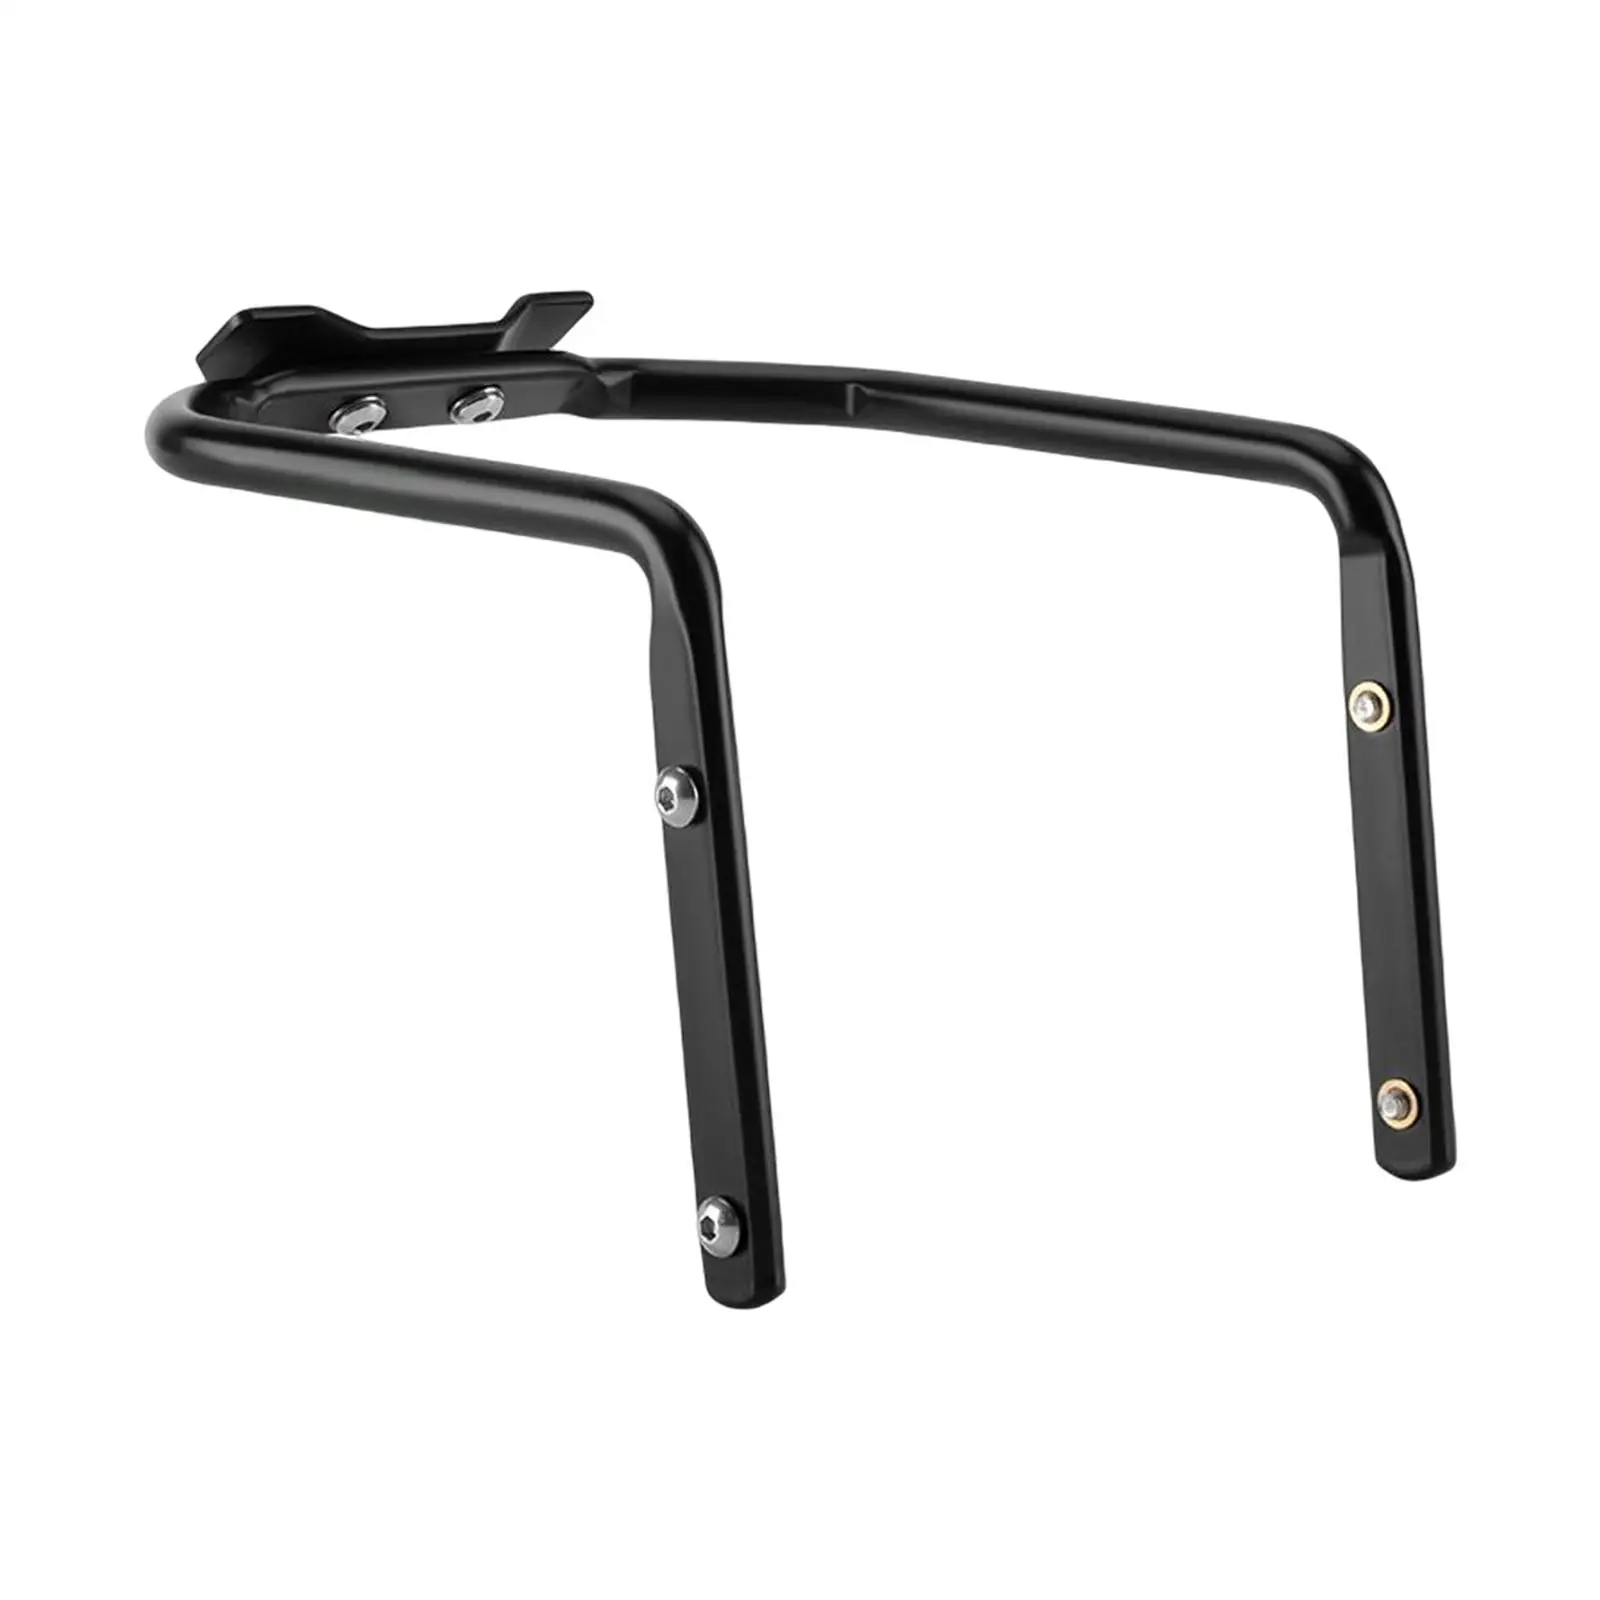 Bicycle Tail Bag Stabilizer Conversion Bracket Rear Rack for Road Bike